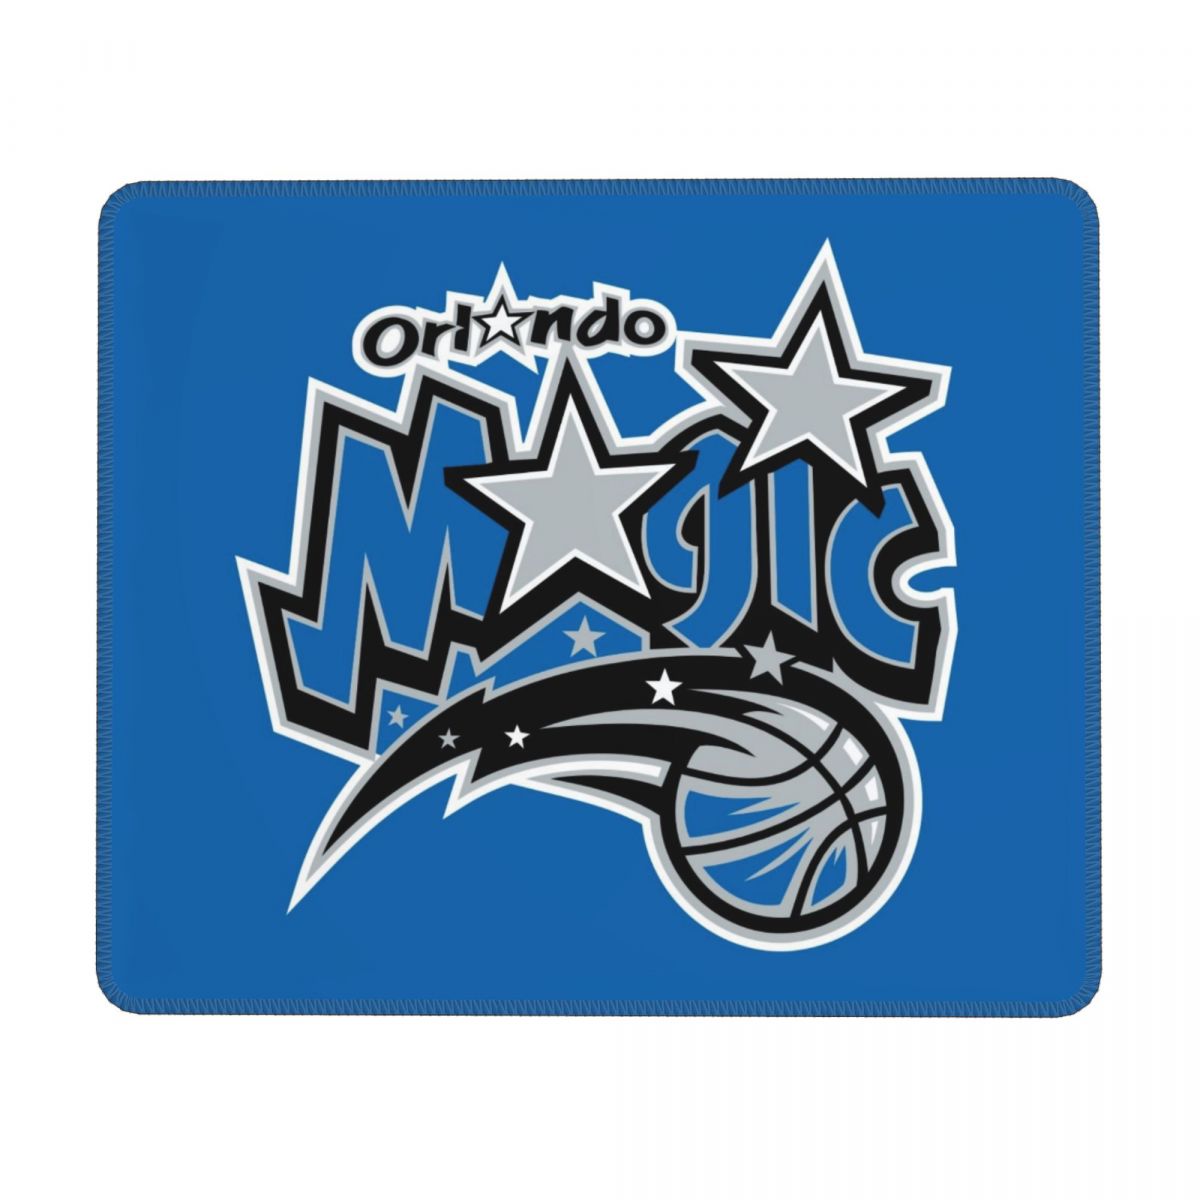 Orlando Magic Blue Square Gaming Mouse Pad with Stitched Edge